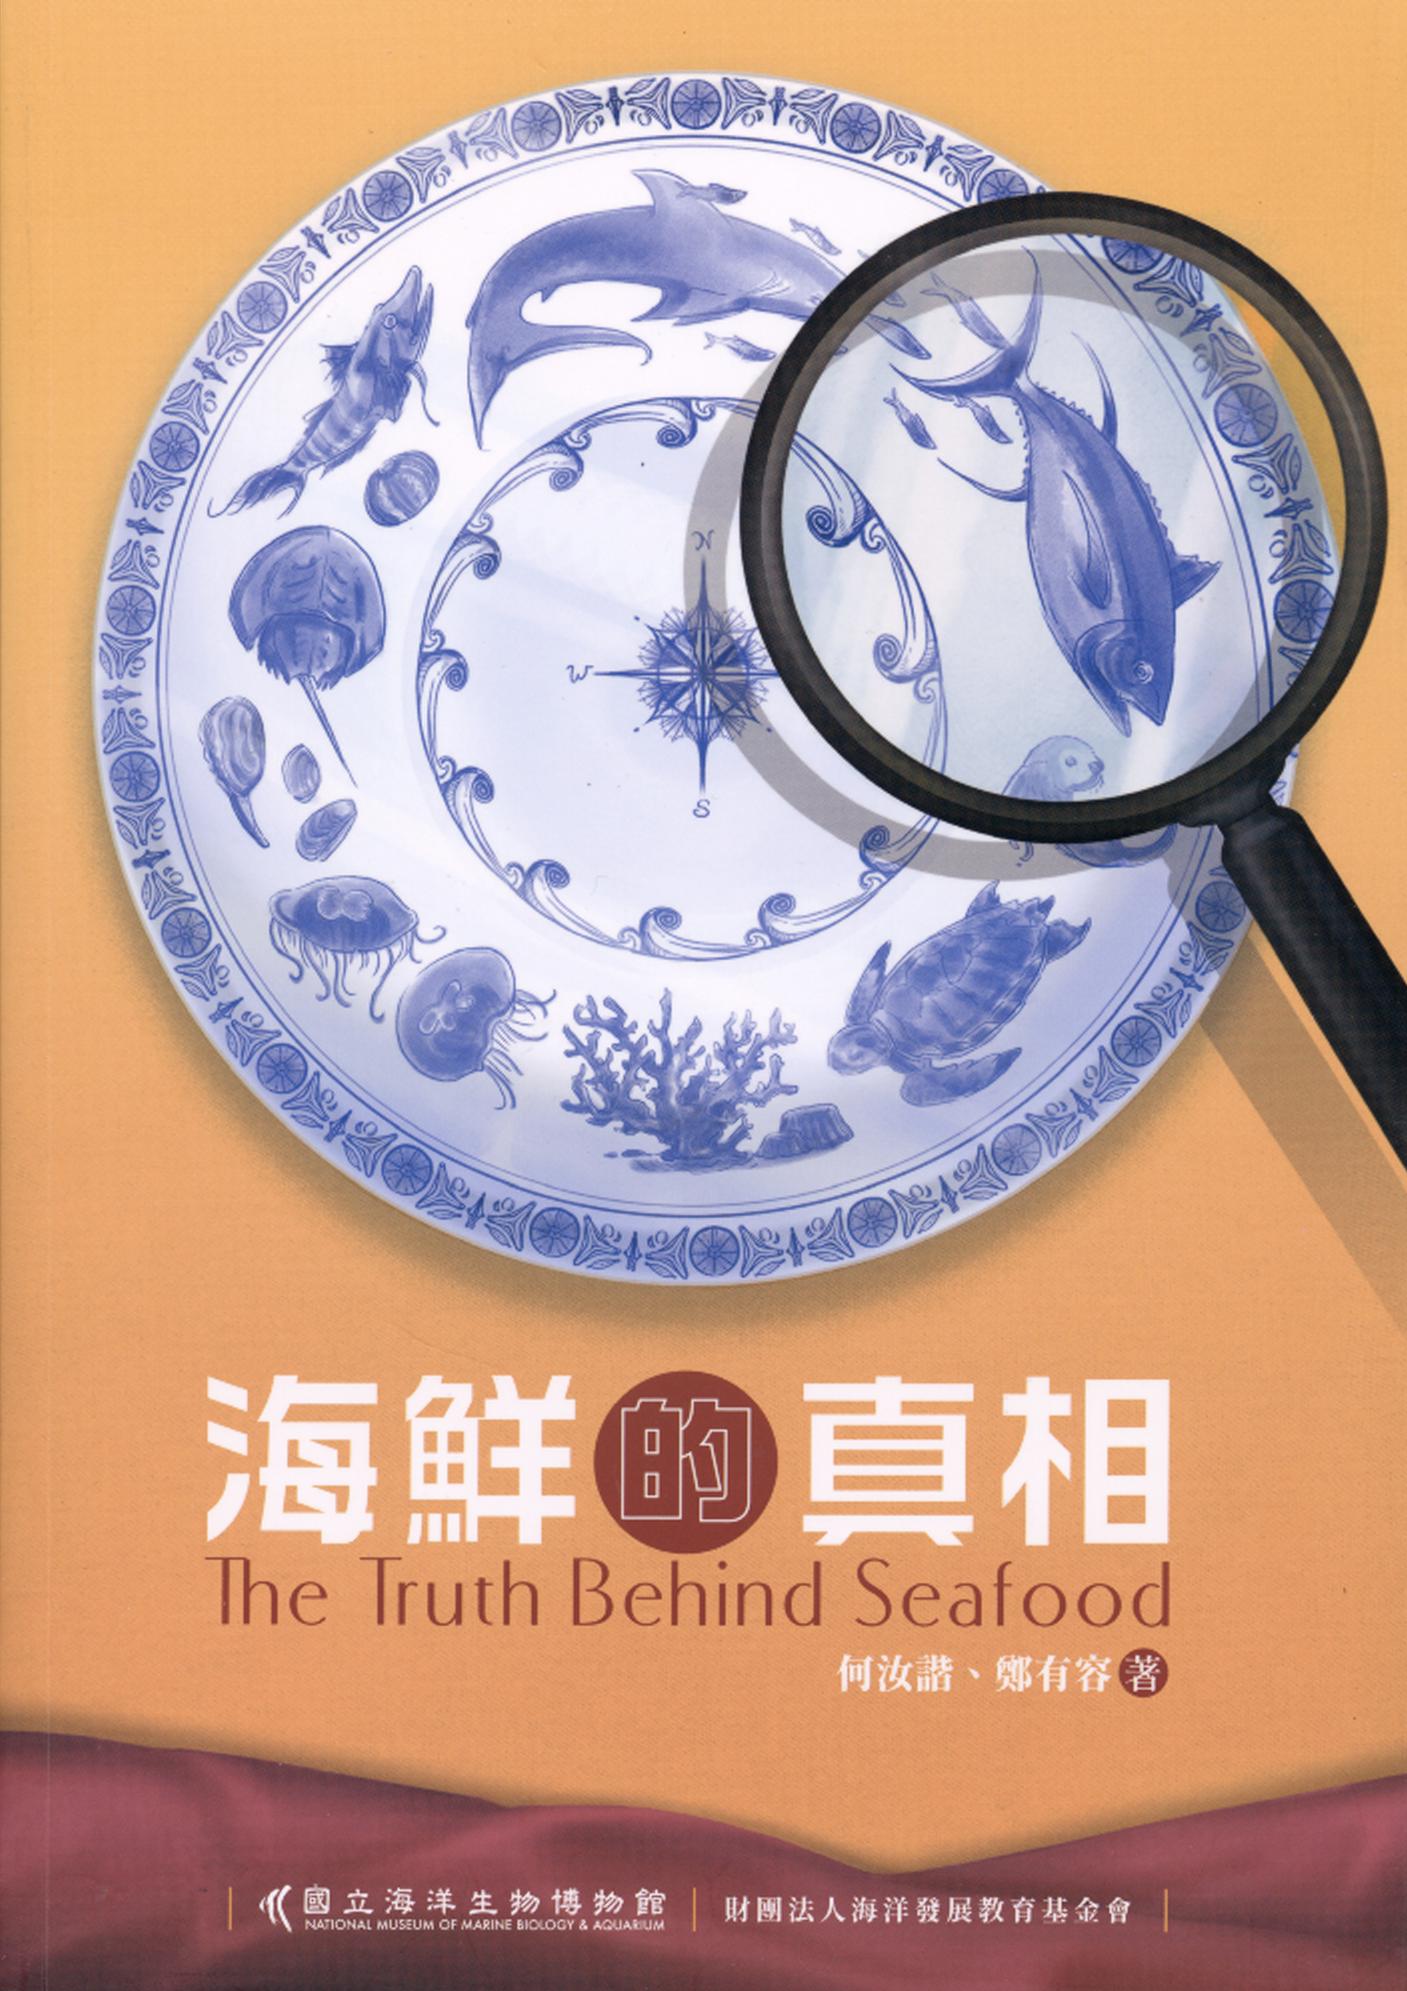 1270. The Truth Behind Seafood/Dr. Ju-shey Ho and Dr. Yu-Rong Cheng/2018